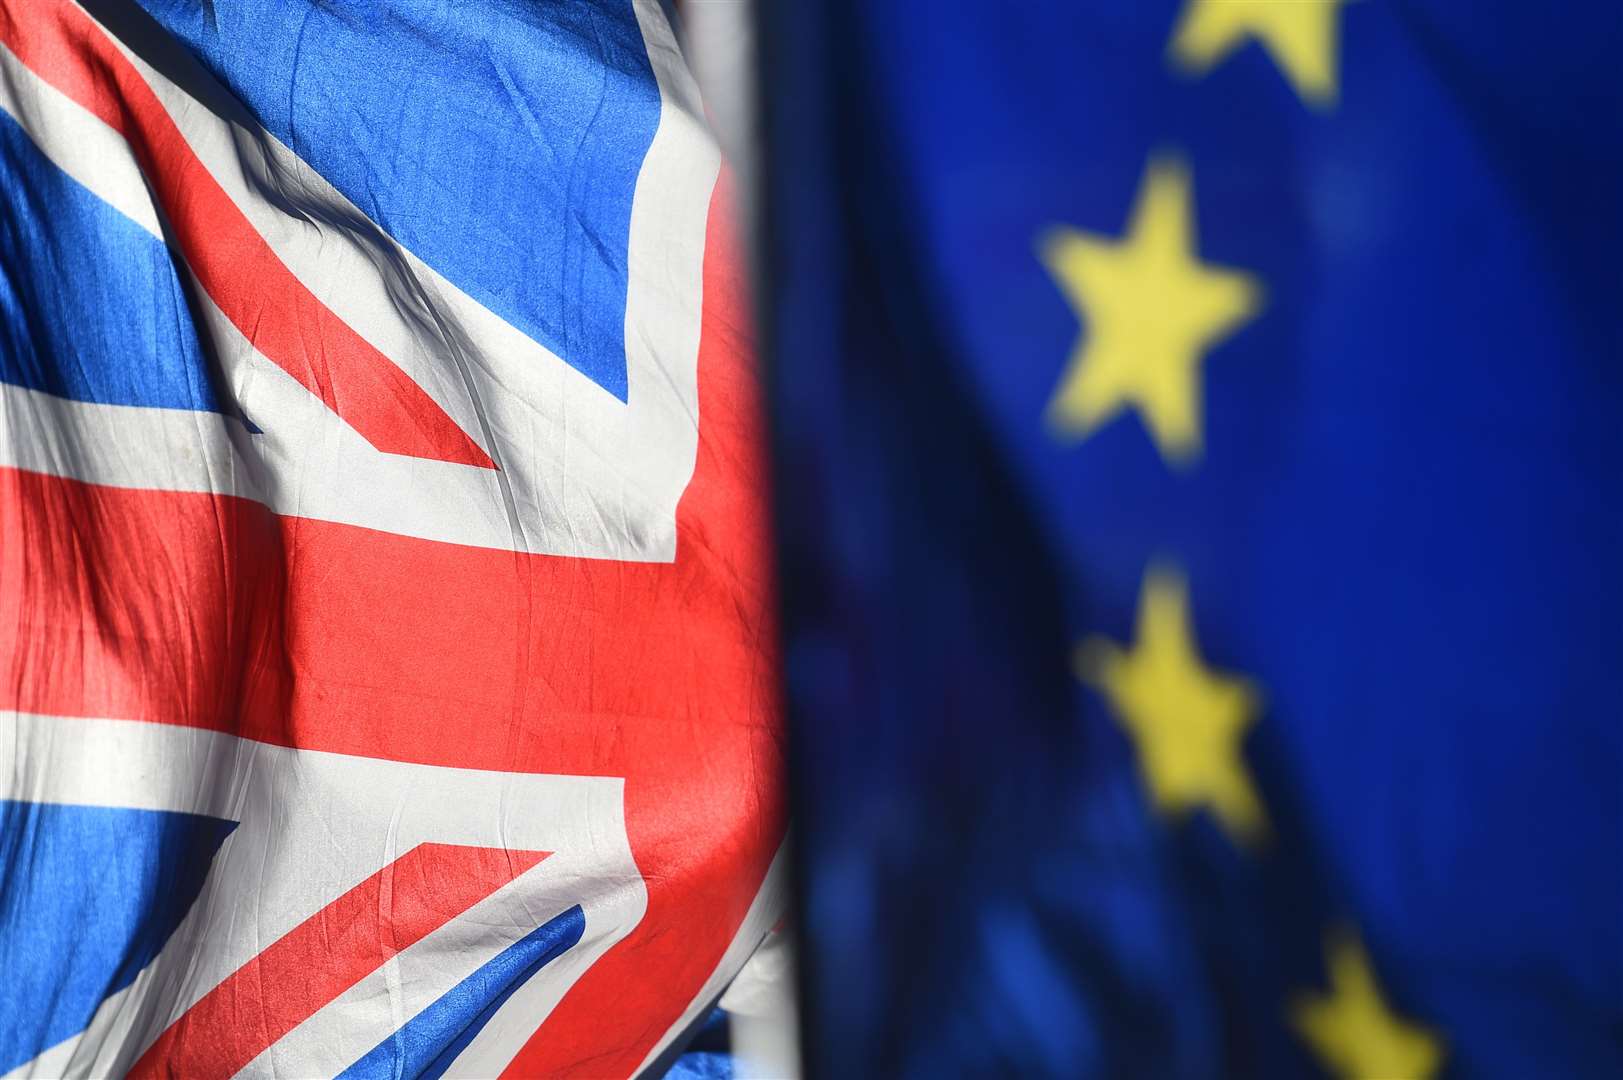 Brexit is due to take place on October 31